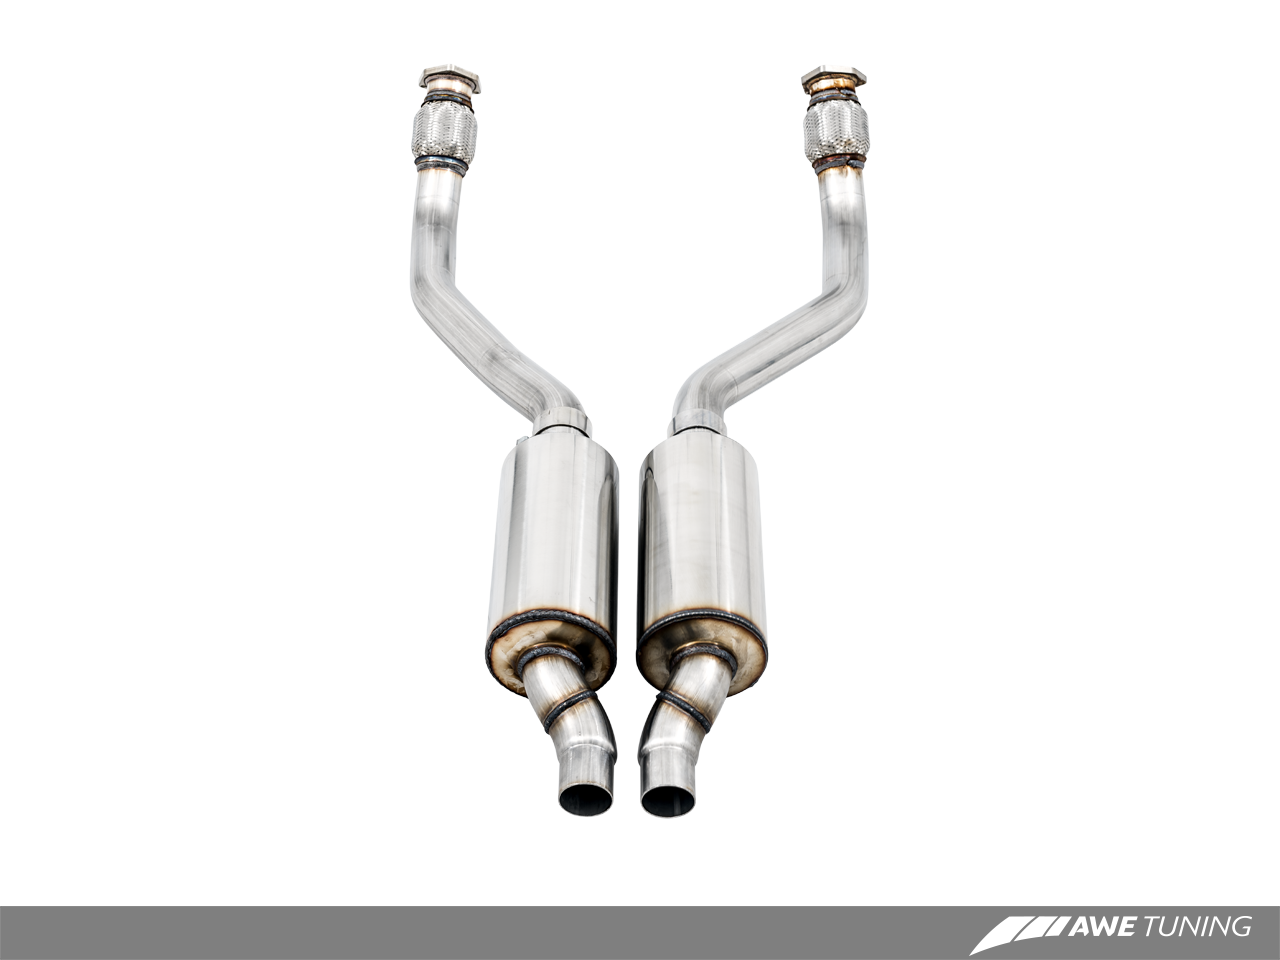 AWE Tuning Audi C7.5 A6 Touring Edition Exhaust Suite - AWE